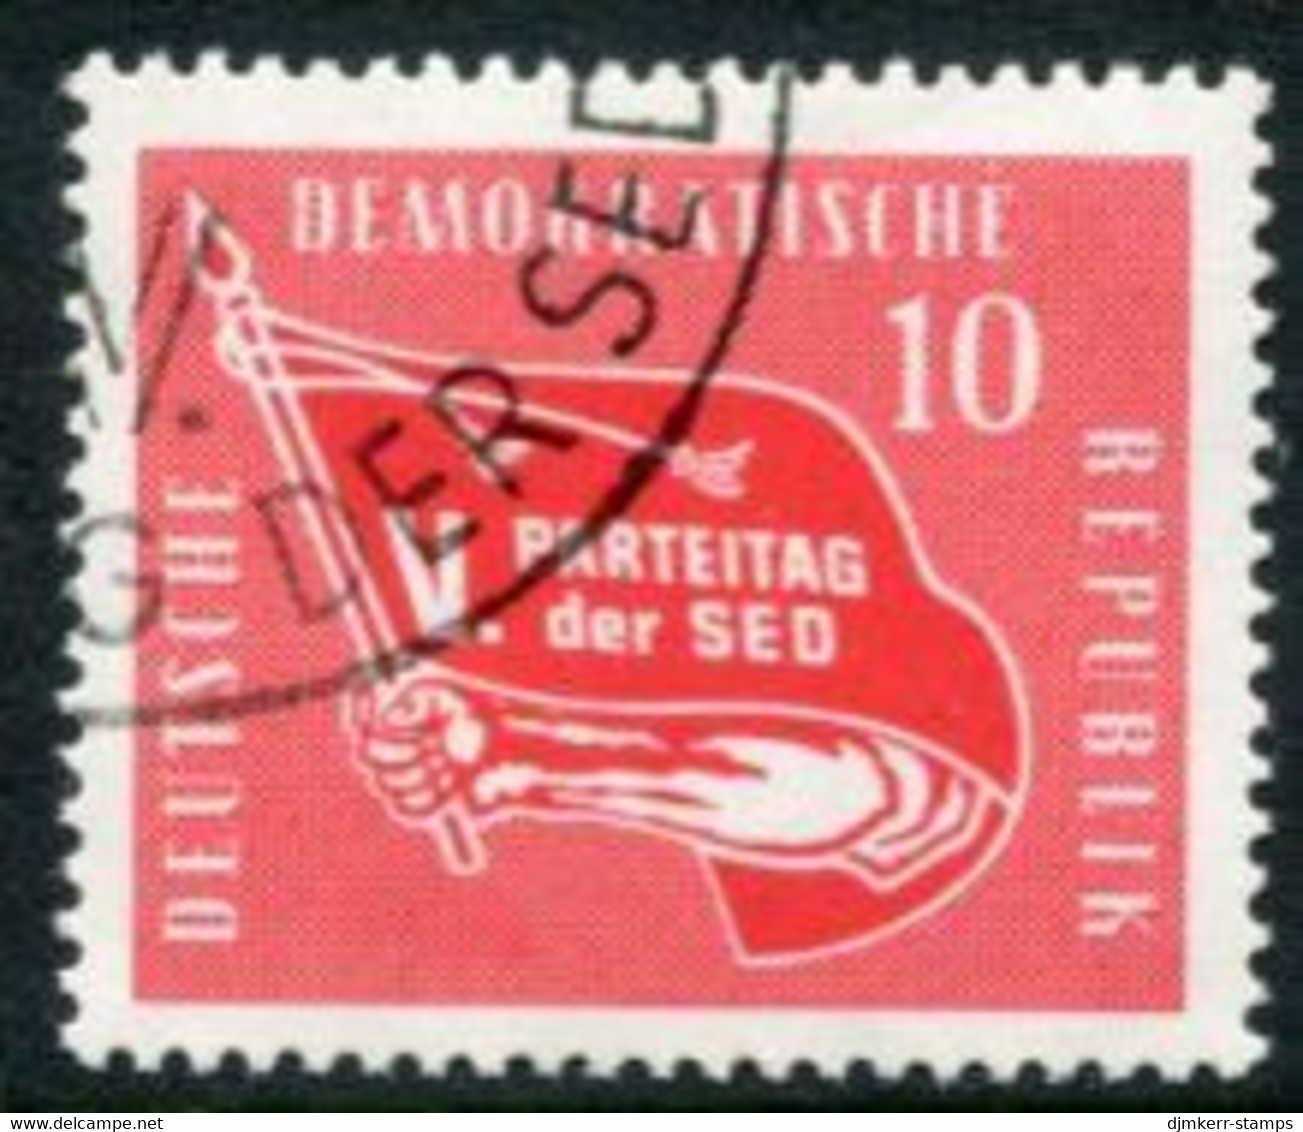 DDR / E. GERMANY 1958 Socialist Unity Party Day Used.  Michel  633 - Gebraucht